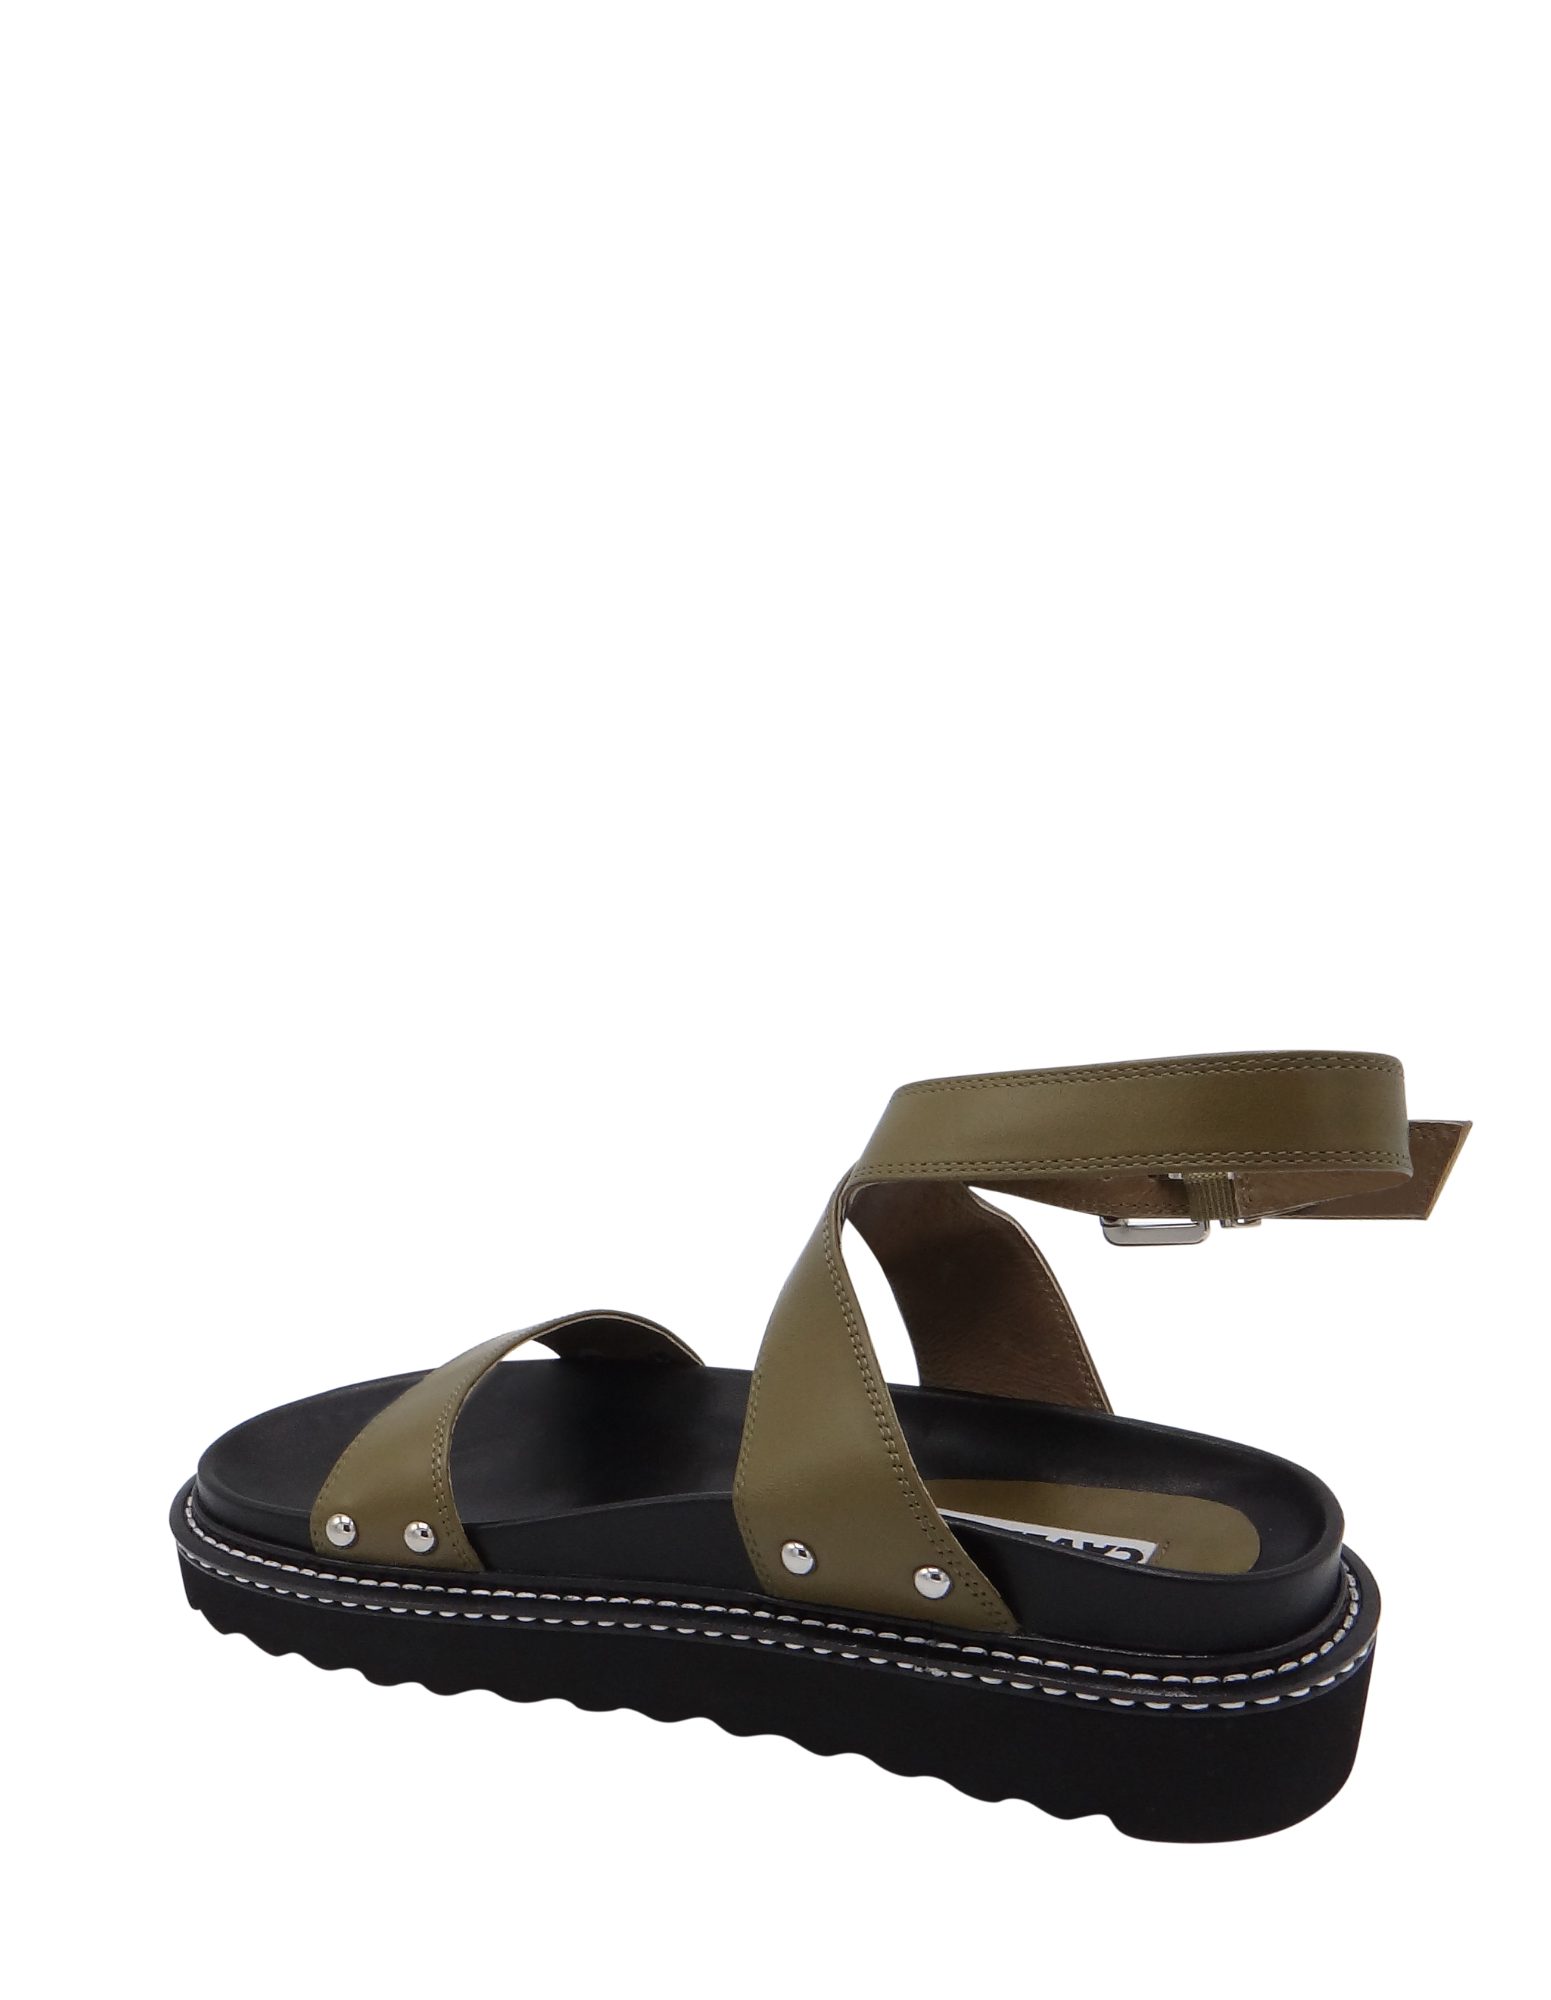 CAVERLEY Earnie Sandal in Olive 23S520C Olive FROM EIGHTYWINGOLD - OFFICIAL BRAND PARTNER